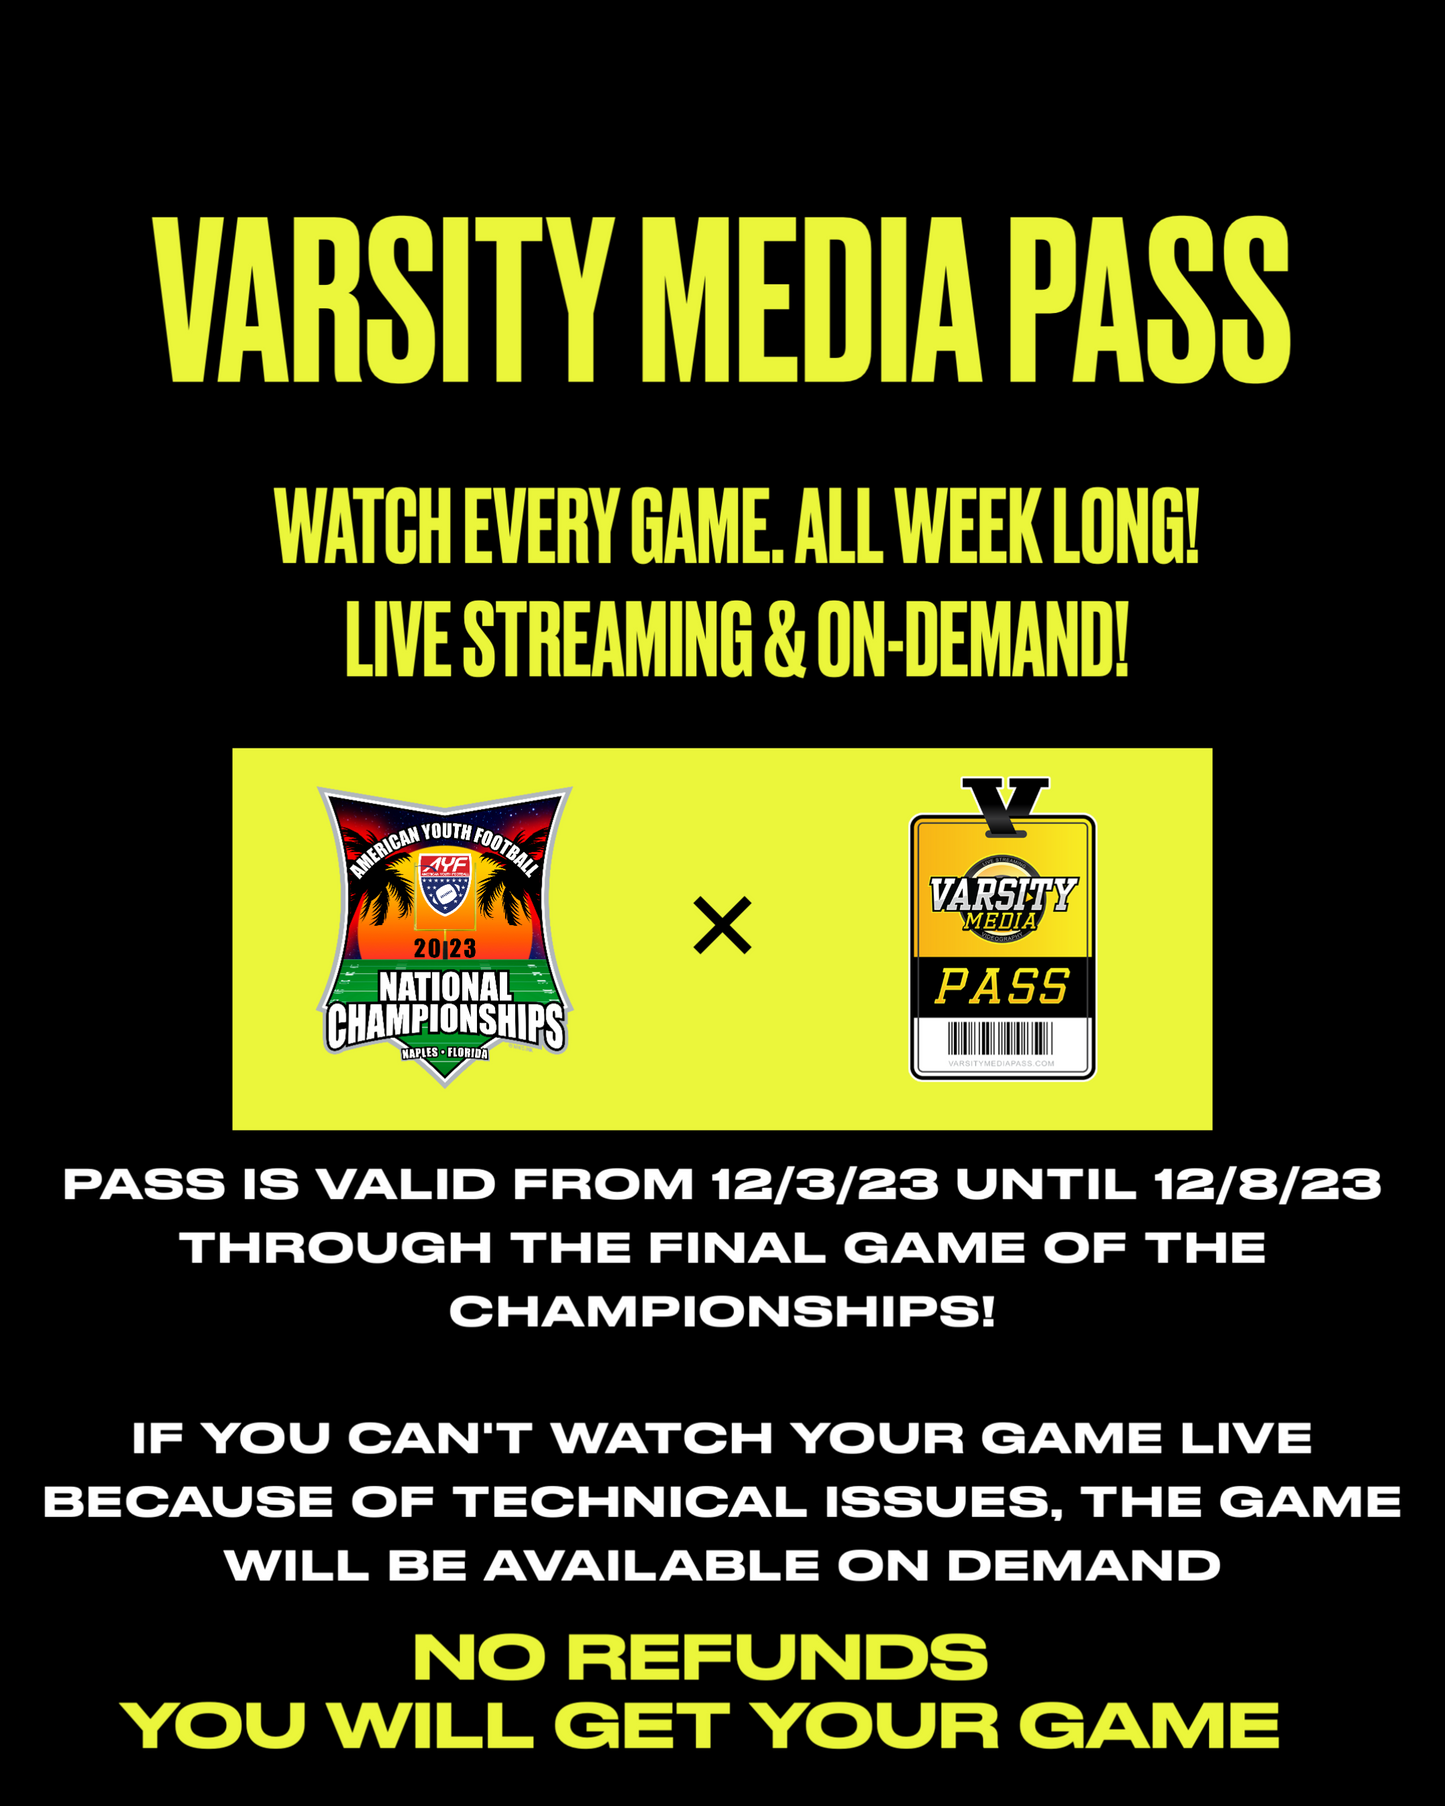 2023 AYF VARSITY MEDIA PASS- ALL FOOTBALL GAMES ALL WEEK LONG LIVE AND ON DEMAND! NO REFUNDS. $69.99.